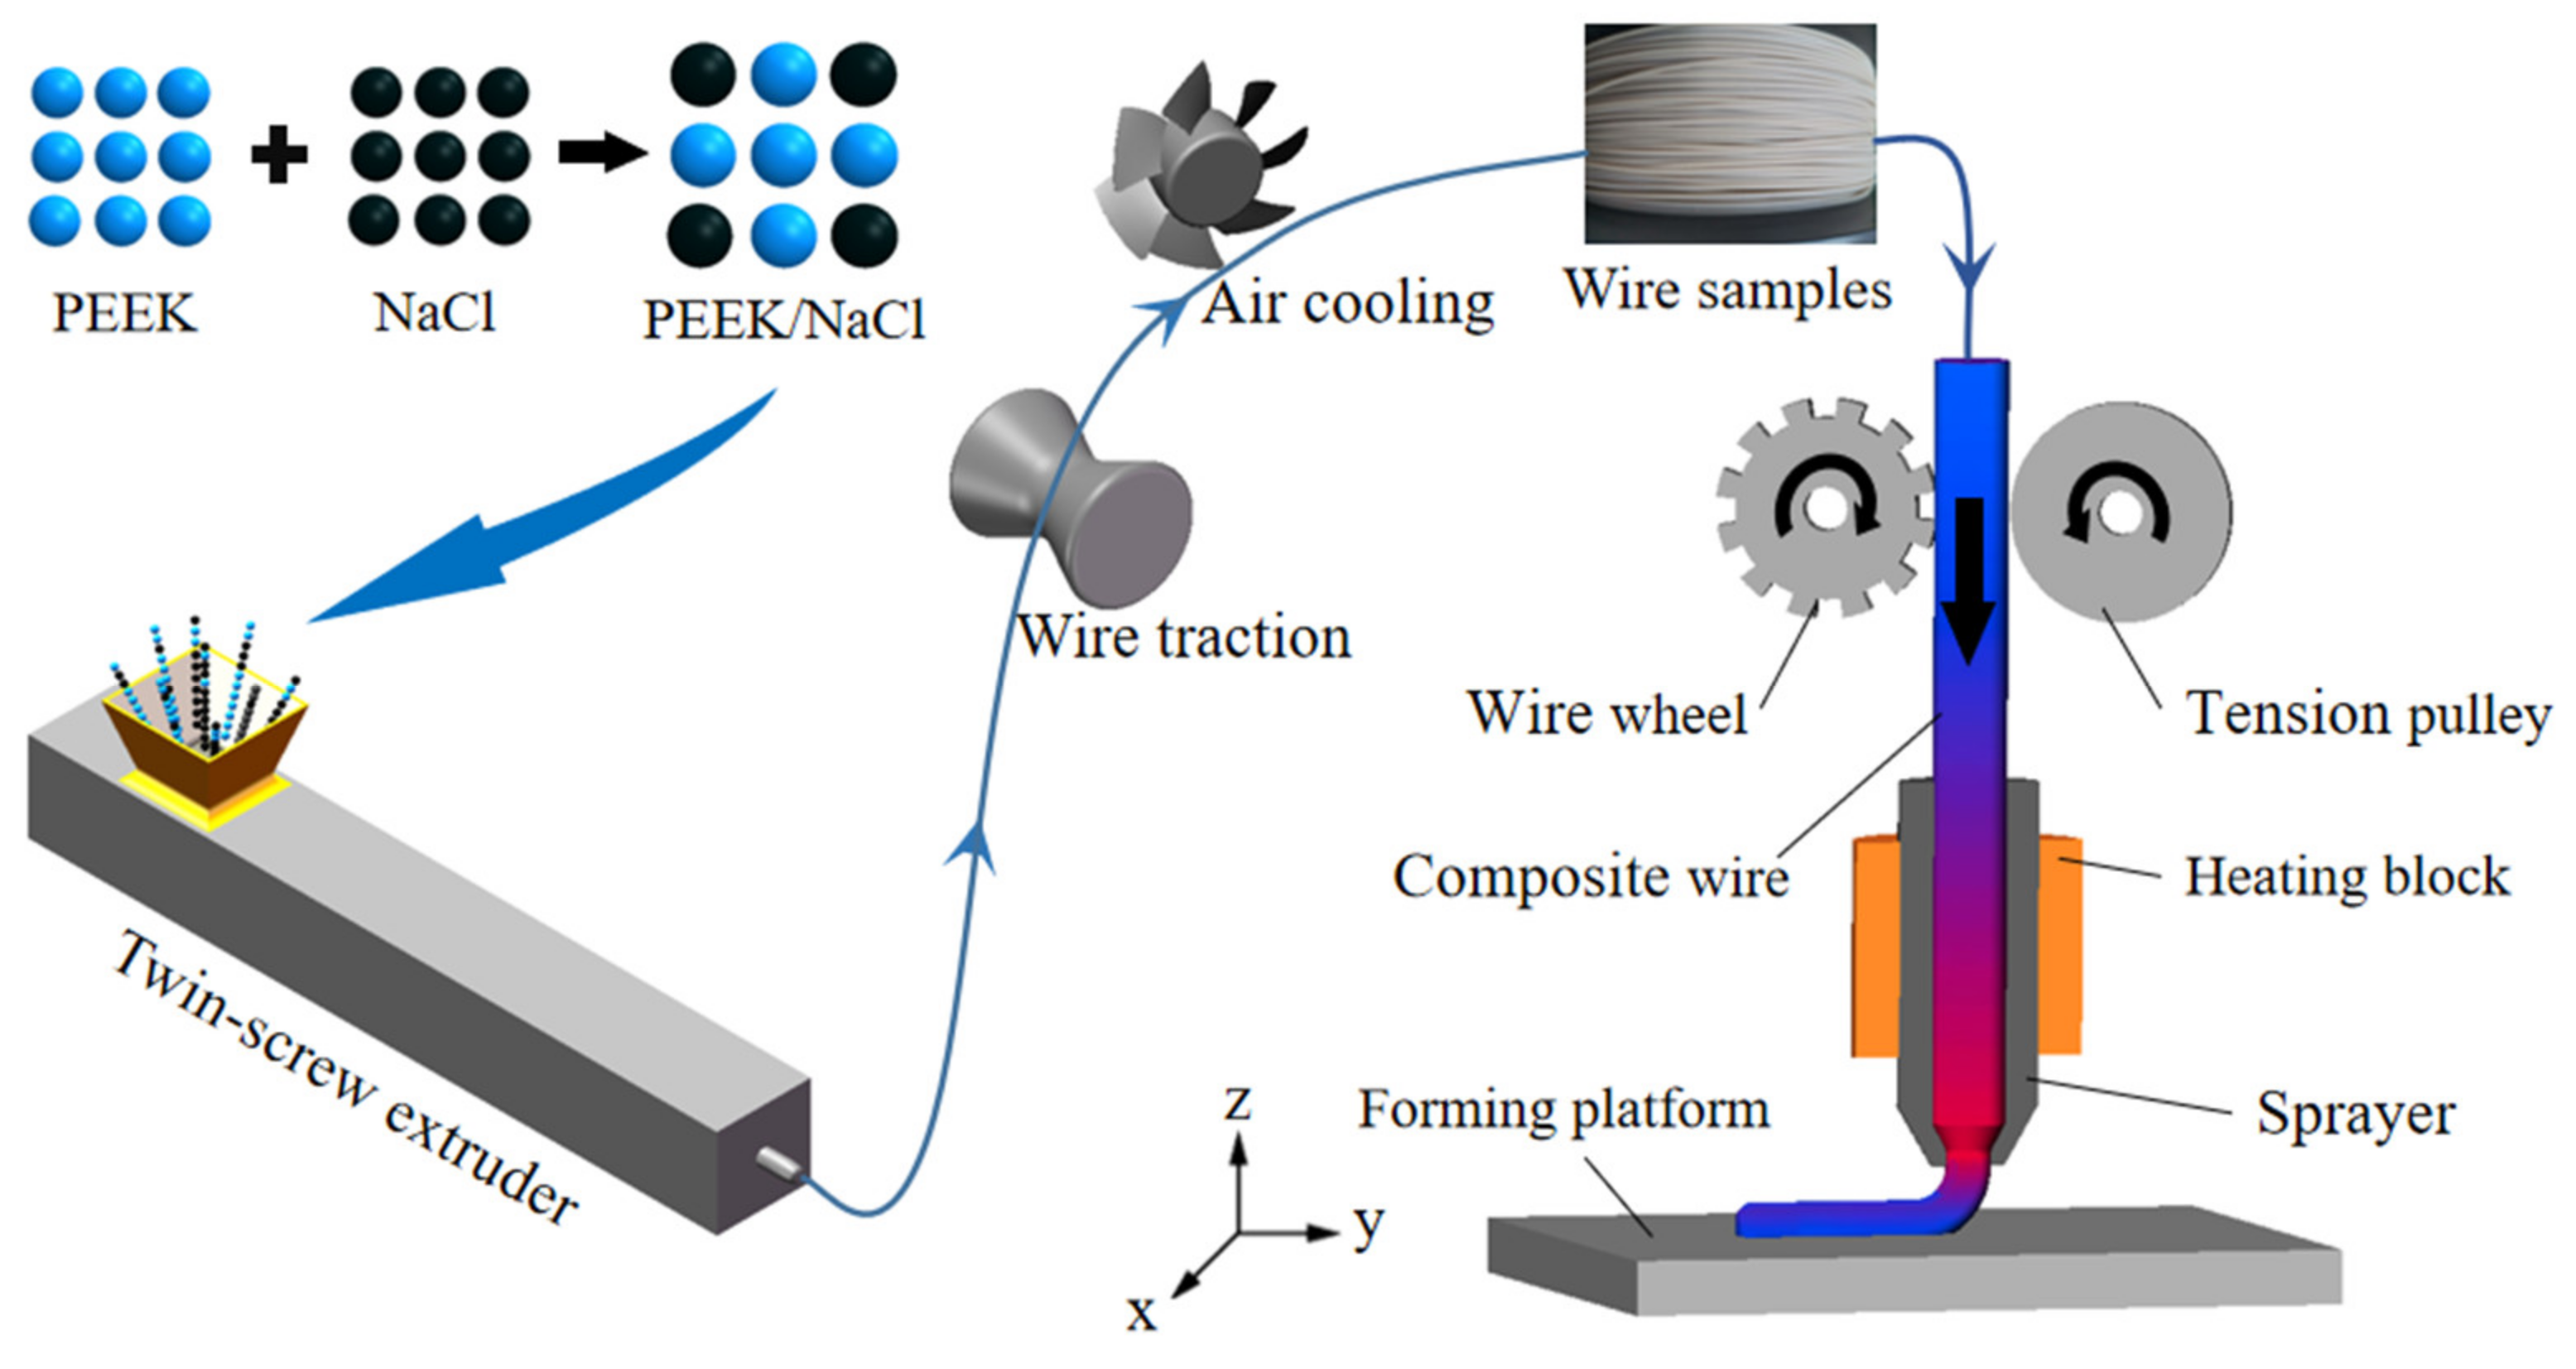 3D printing of porous polyimide for high-performance oil